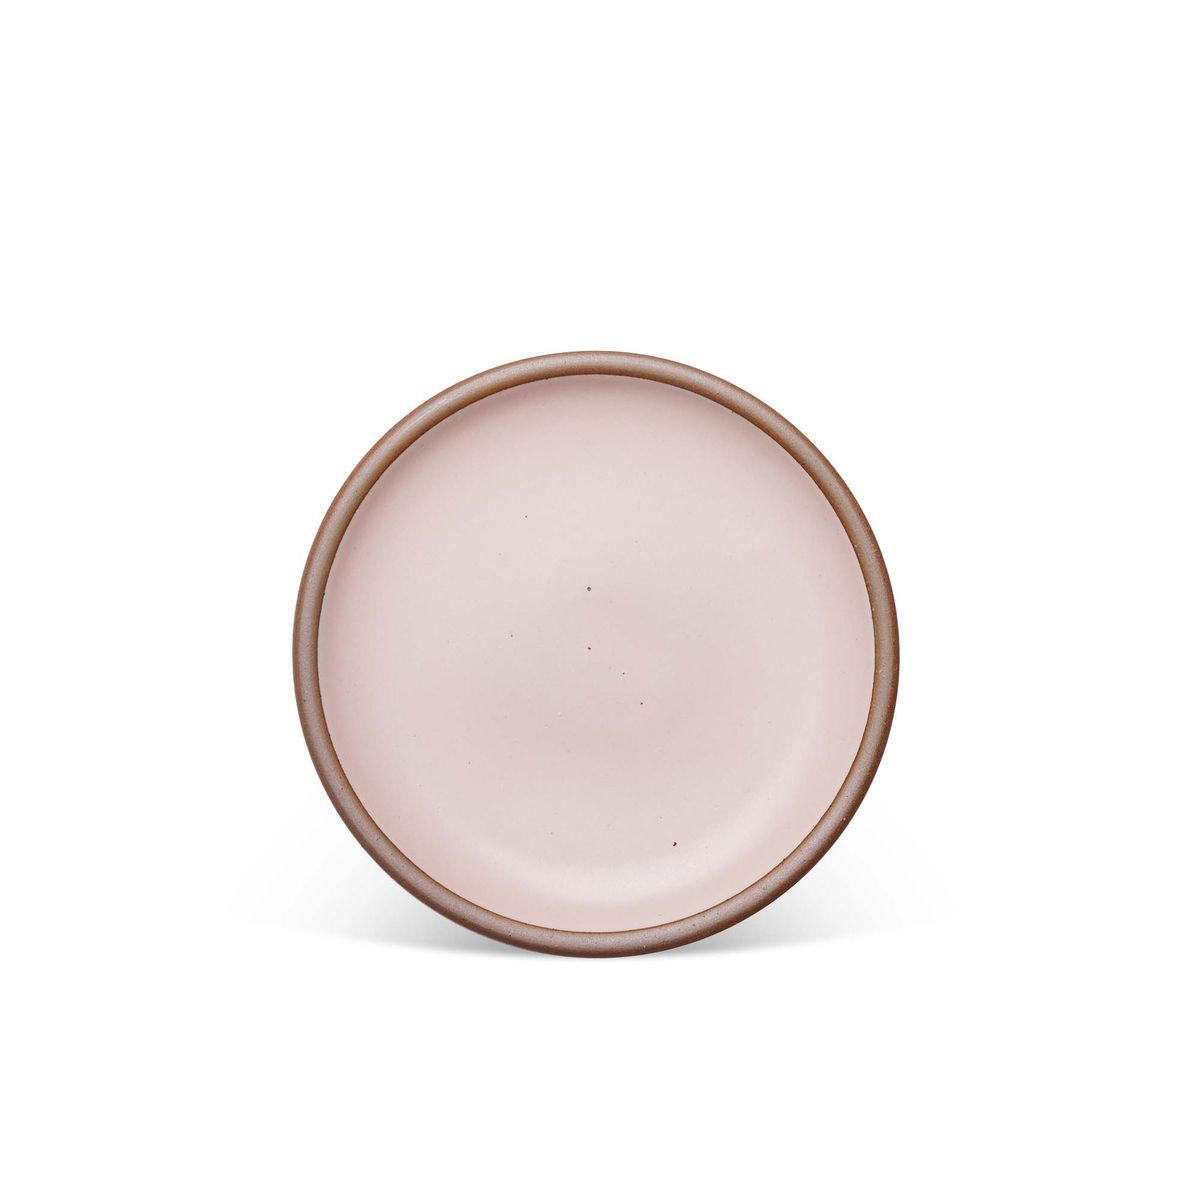 A medium sized ceramic plate in a soft light pink color featuring iron speckles and an unglazed rim